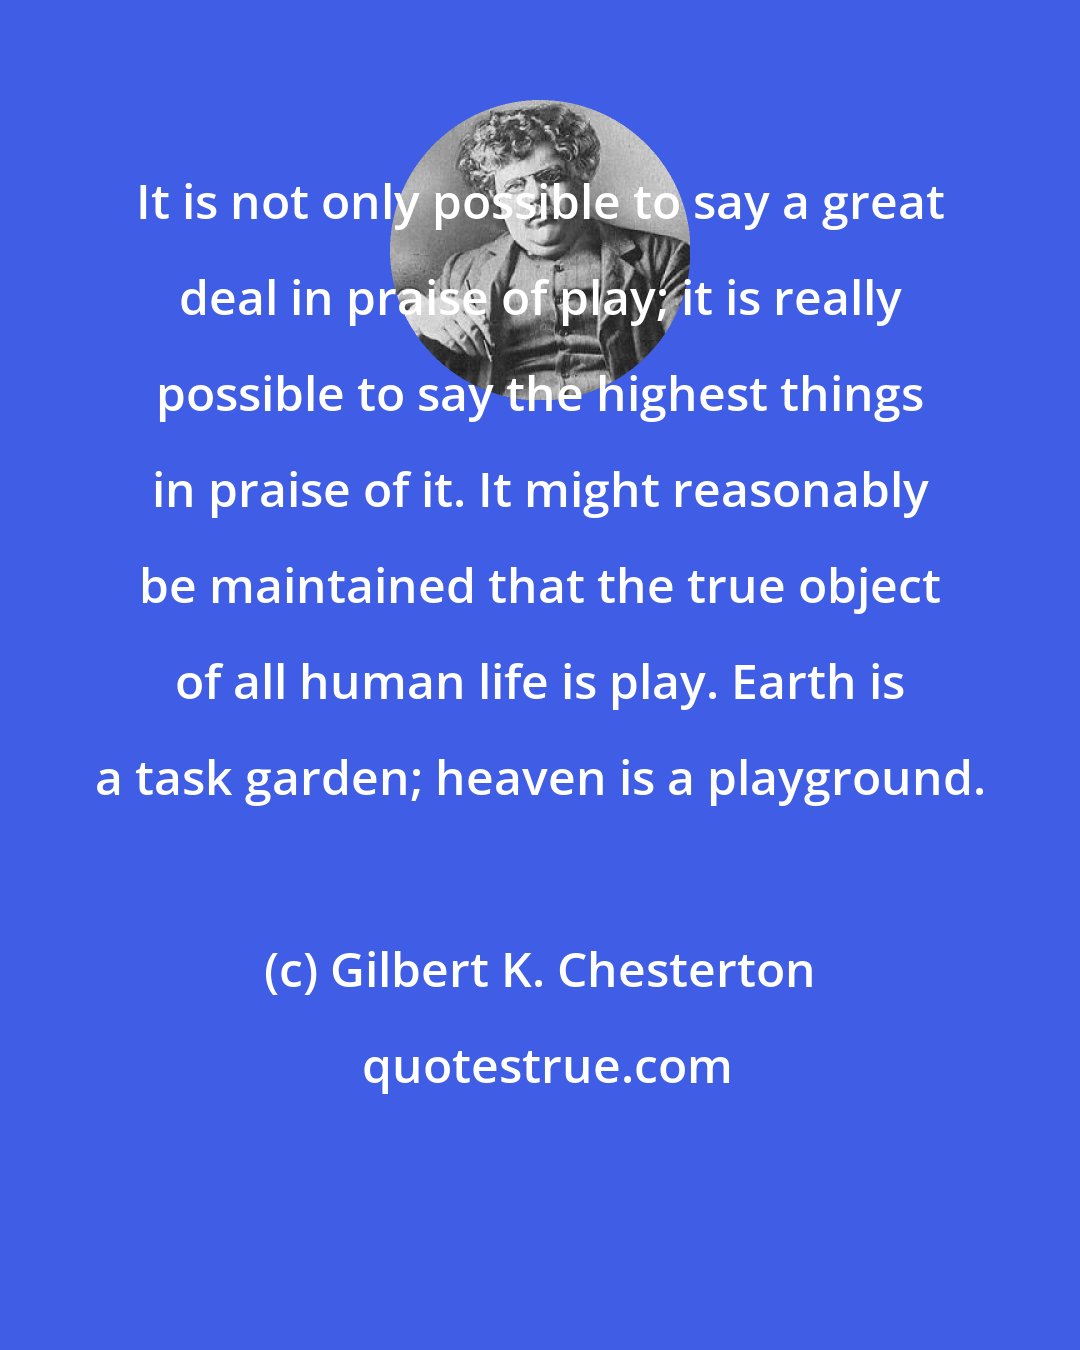 Gilbert K. Chesterton: It is not only possible to say a great deal in praise of play; it is really possible to say the highest things in praise of it. It might reasonably be maintained that the true object of all human life is play. Earth is a task garden; heaven is a playground.